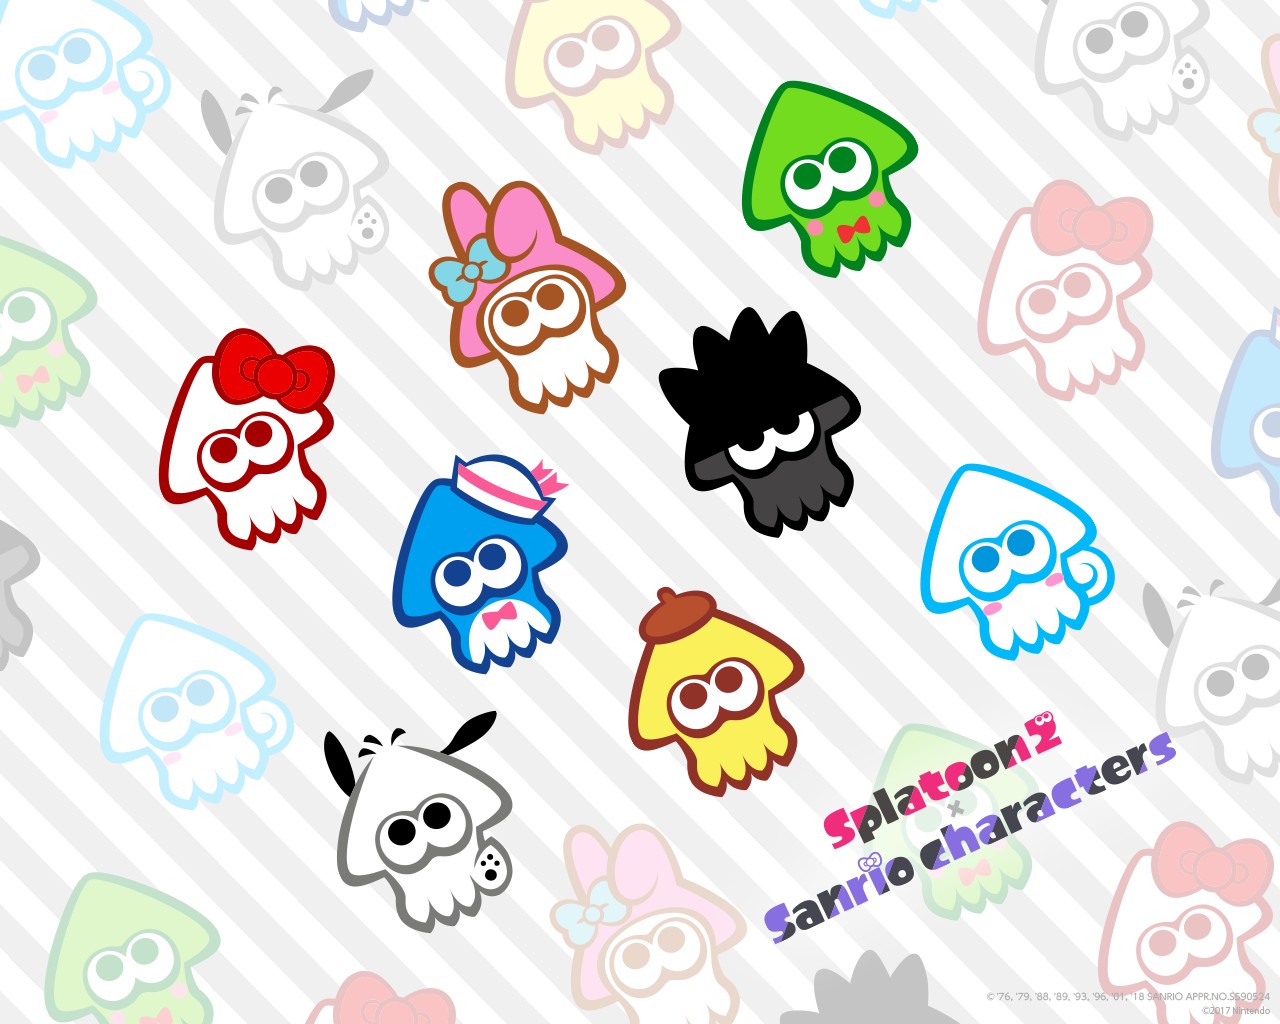 200+] Sanrio Characters Wallpapers